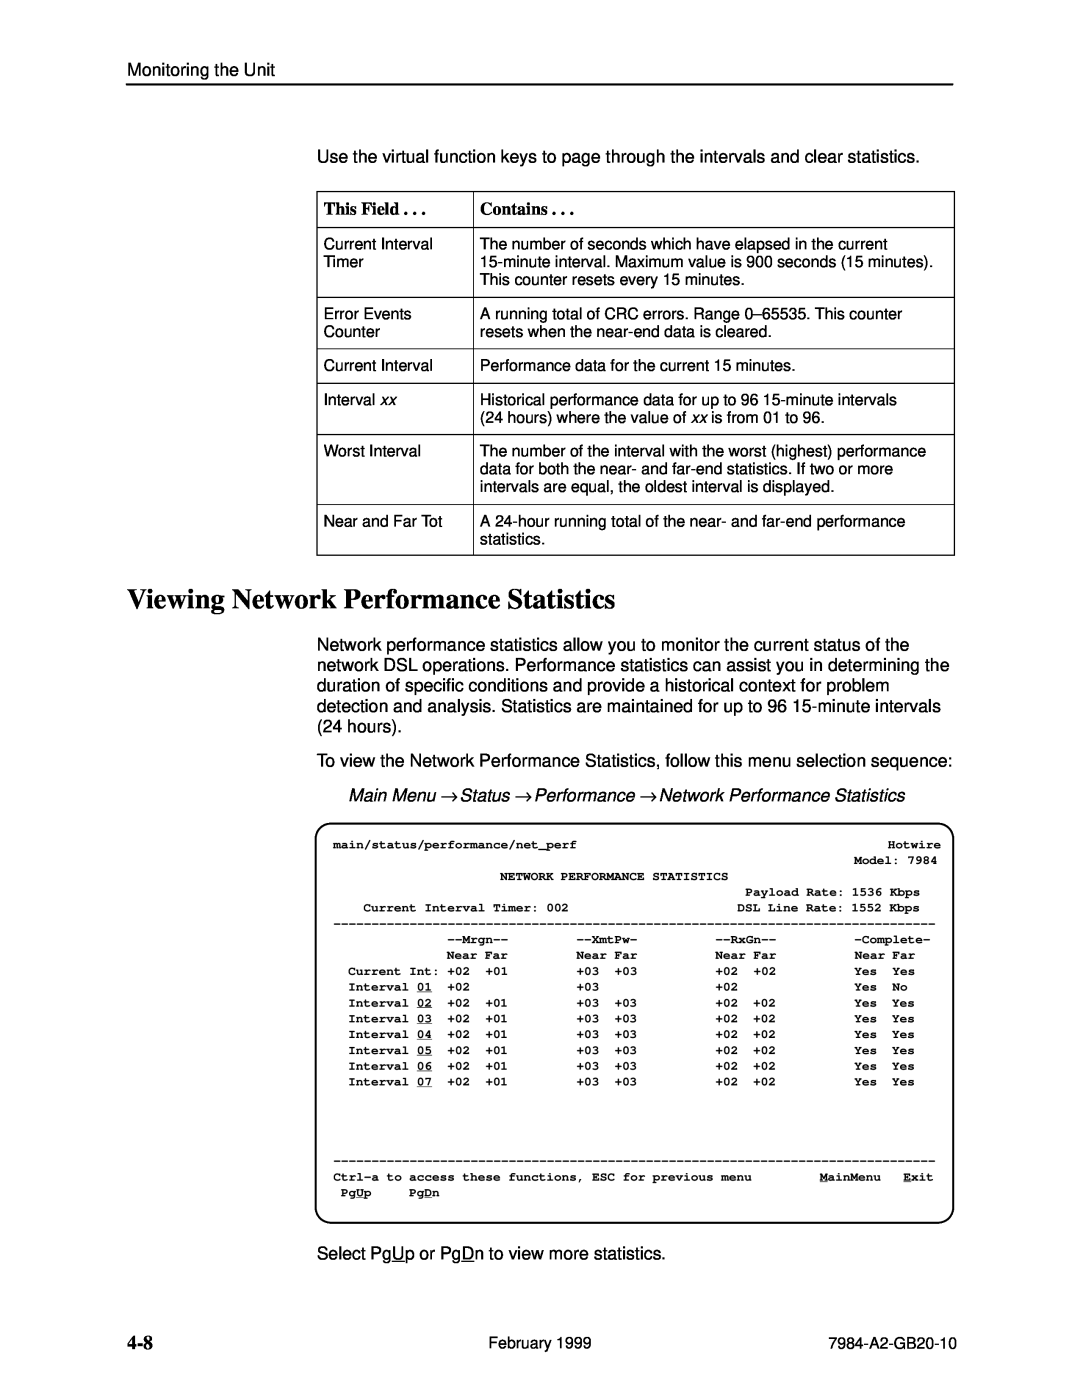 Paradyne Hotwire 7984 manual Viewing Network Performance Statistics, This Field, Contains 